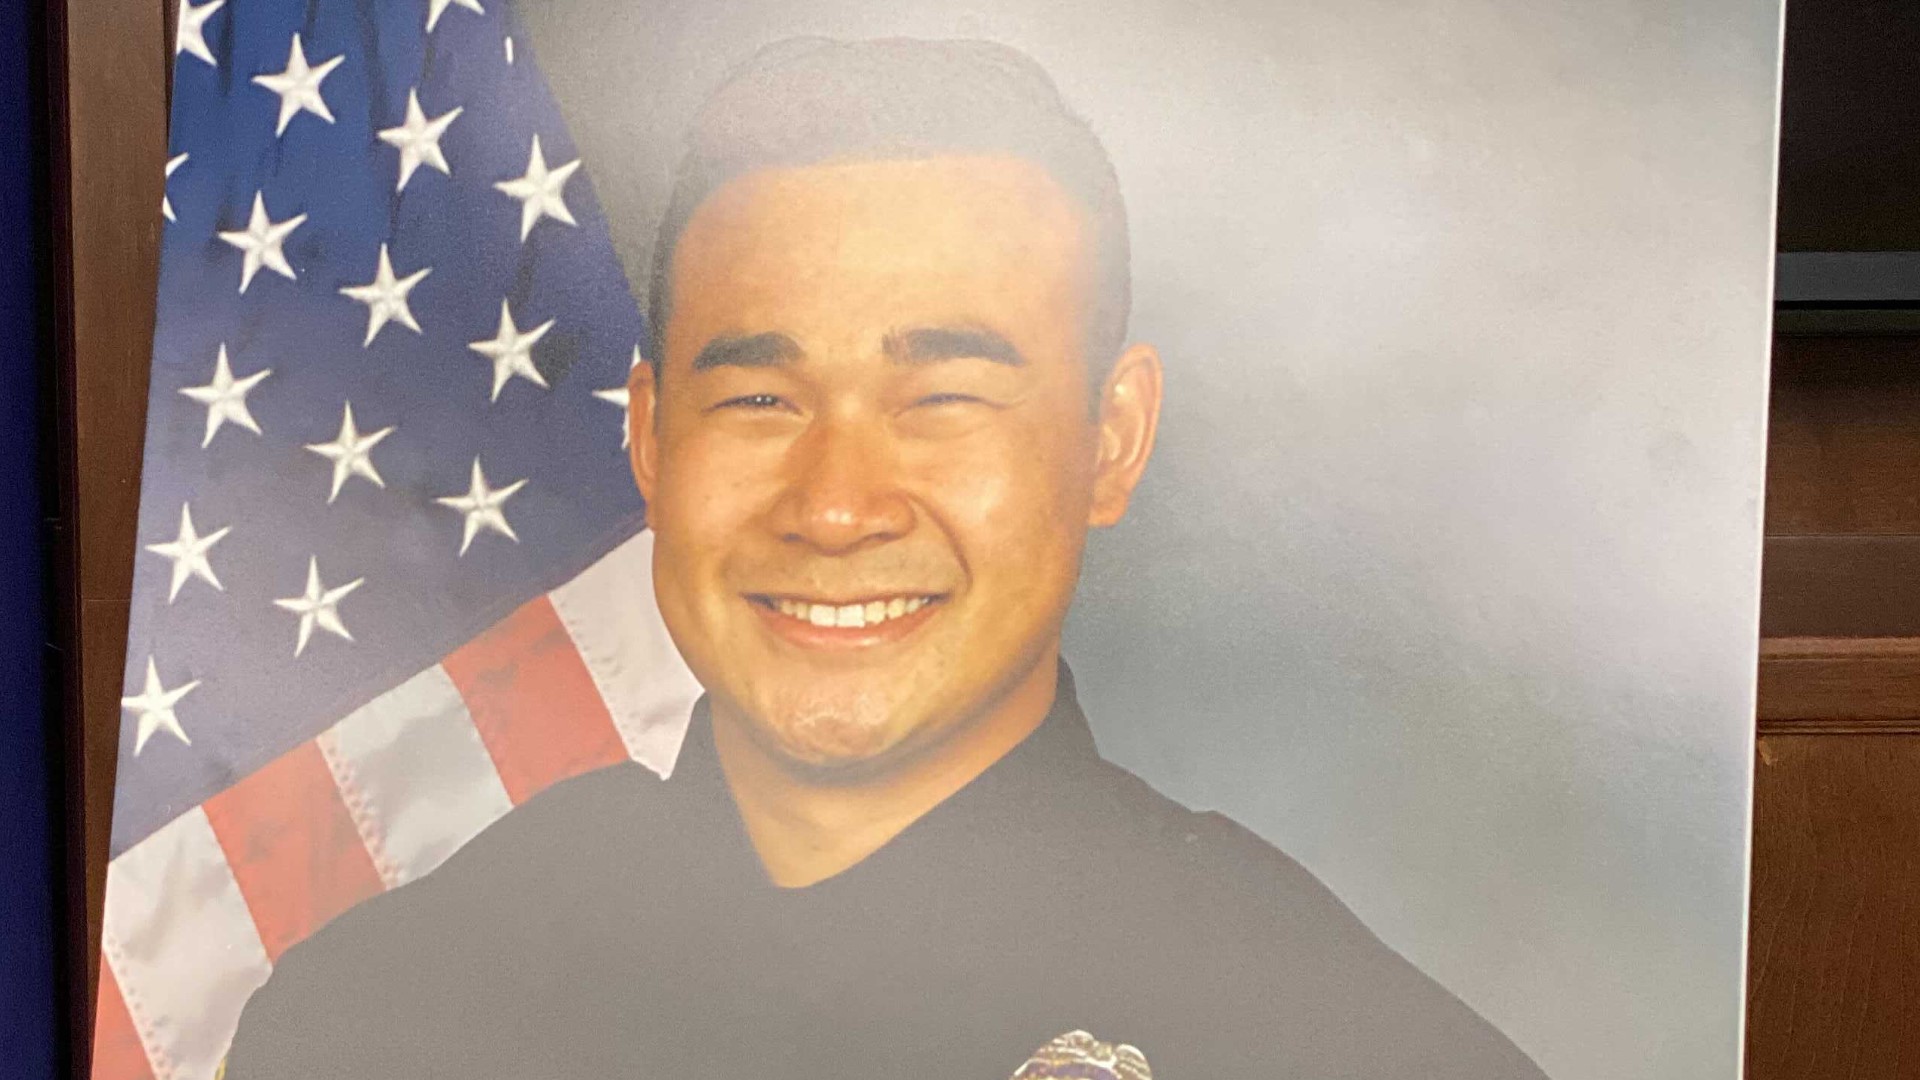 Officer Jimmy Inn, 30, was hired by the Stockton Police Department in 2015.